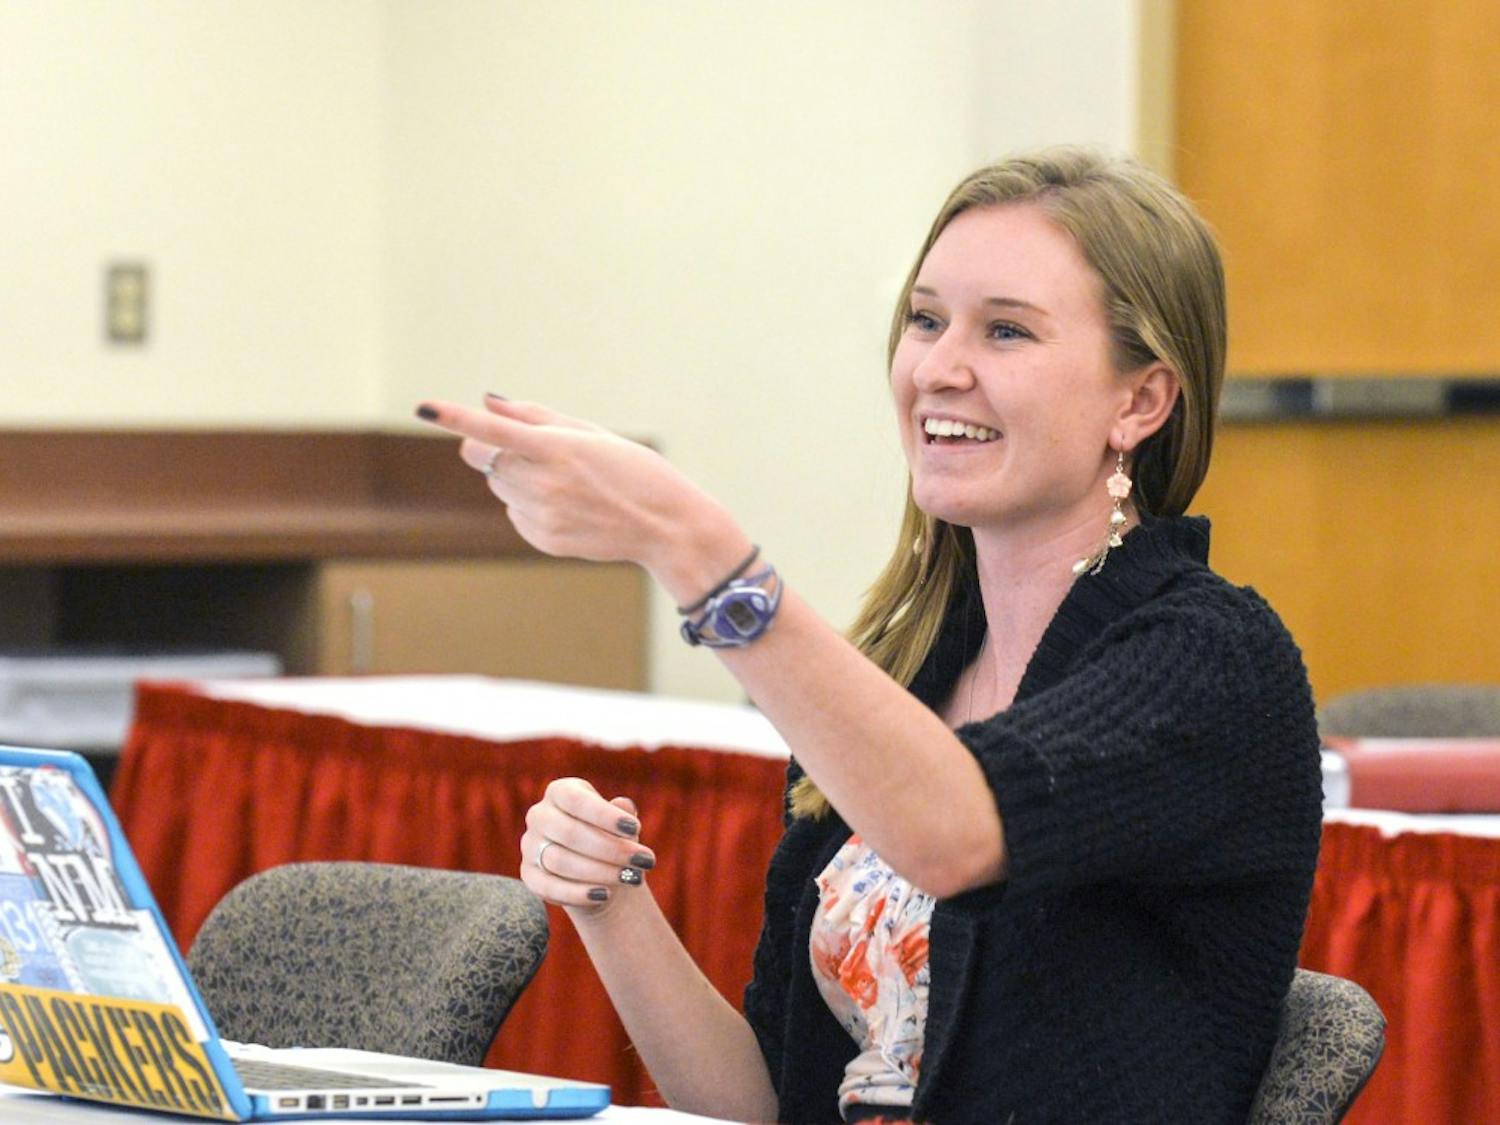 ASUNM president, Jenna Hagengruber delivers her President's report on Wednesday evening at the SUB. The meeting touched on a number of topics such as the resignation of two senators, policy changes and appropriations. 